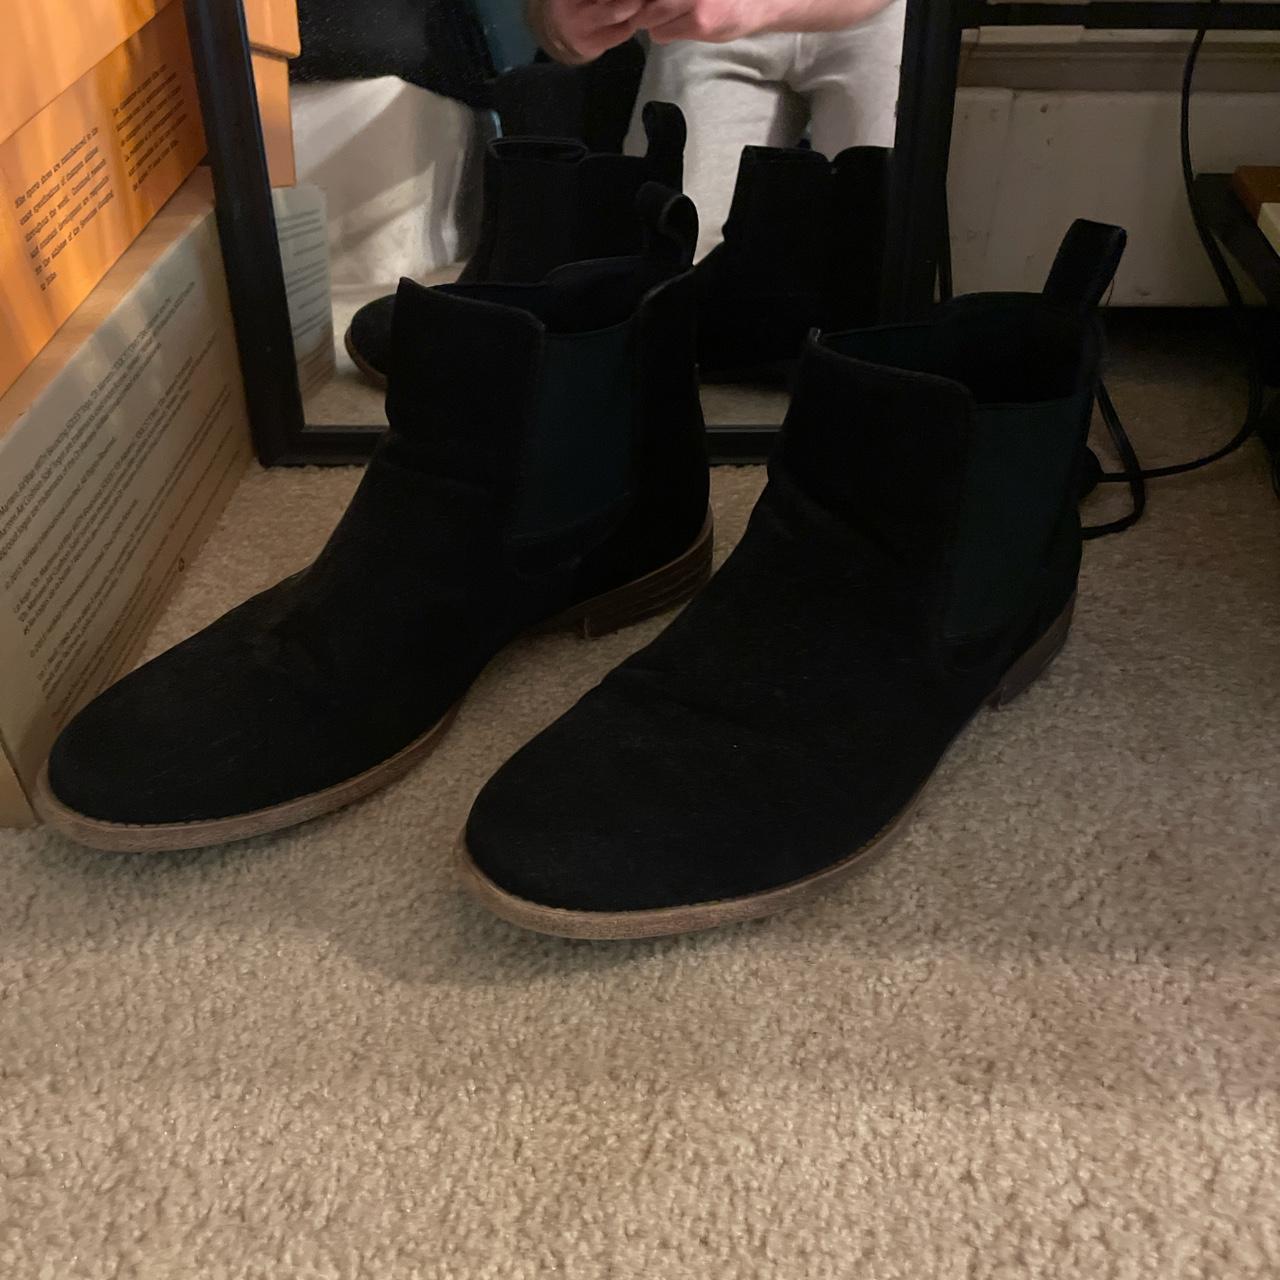 jousen chelsea boots (no box) significant wear and... - Depop